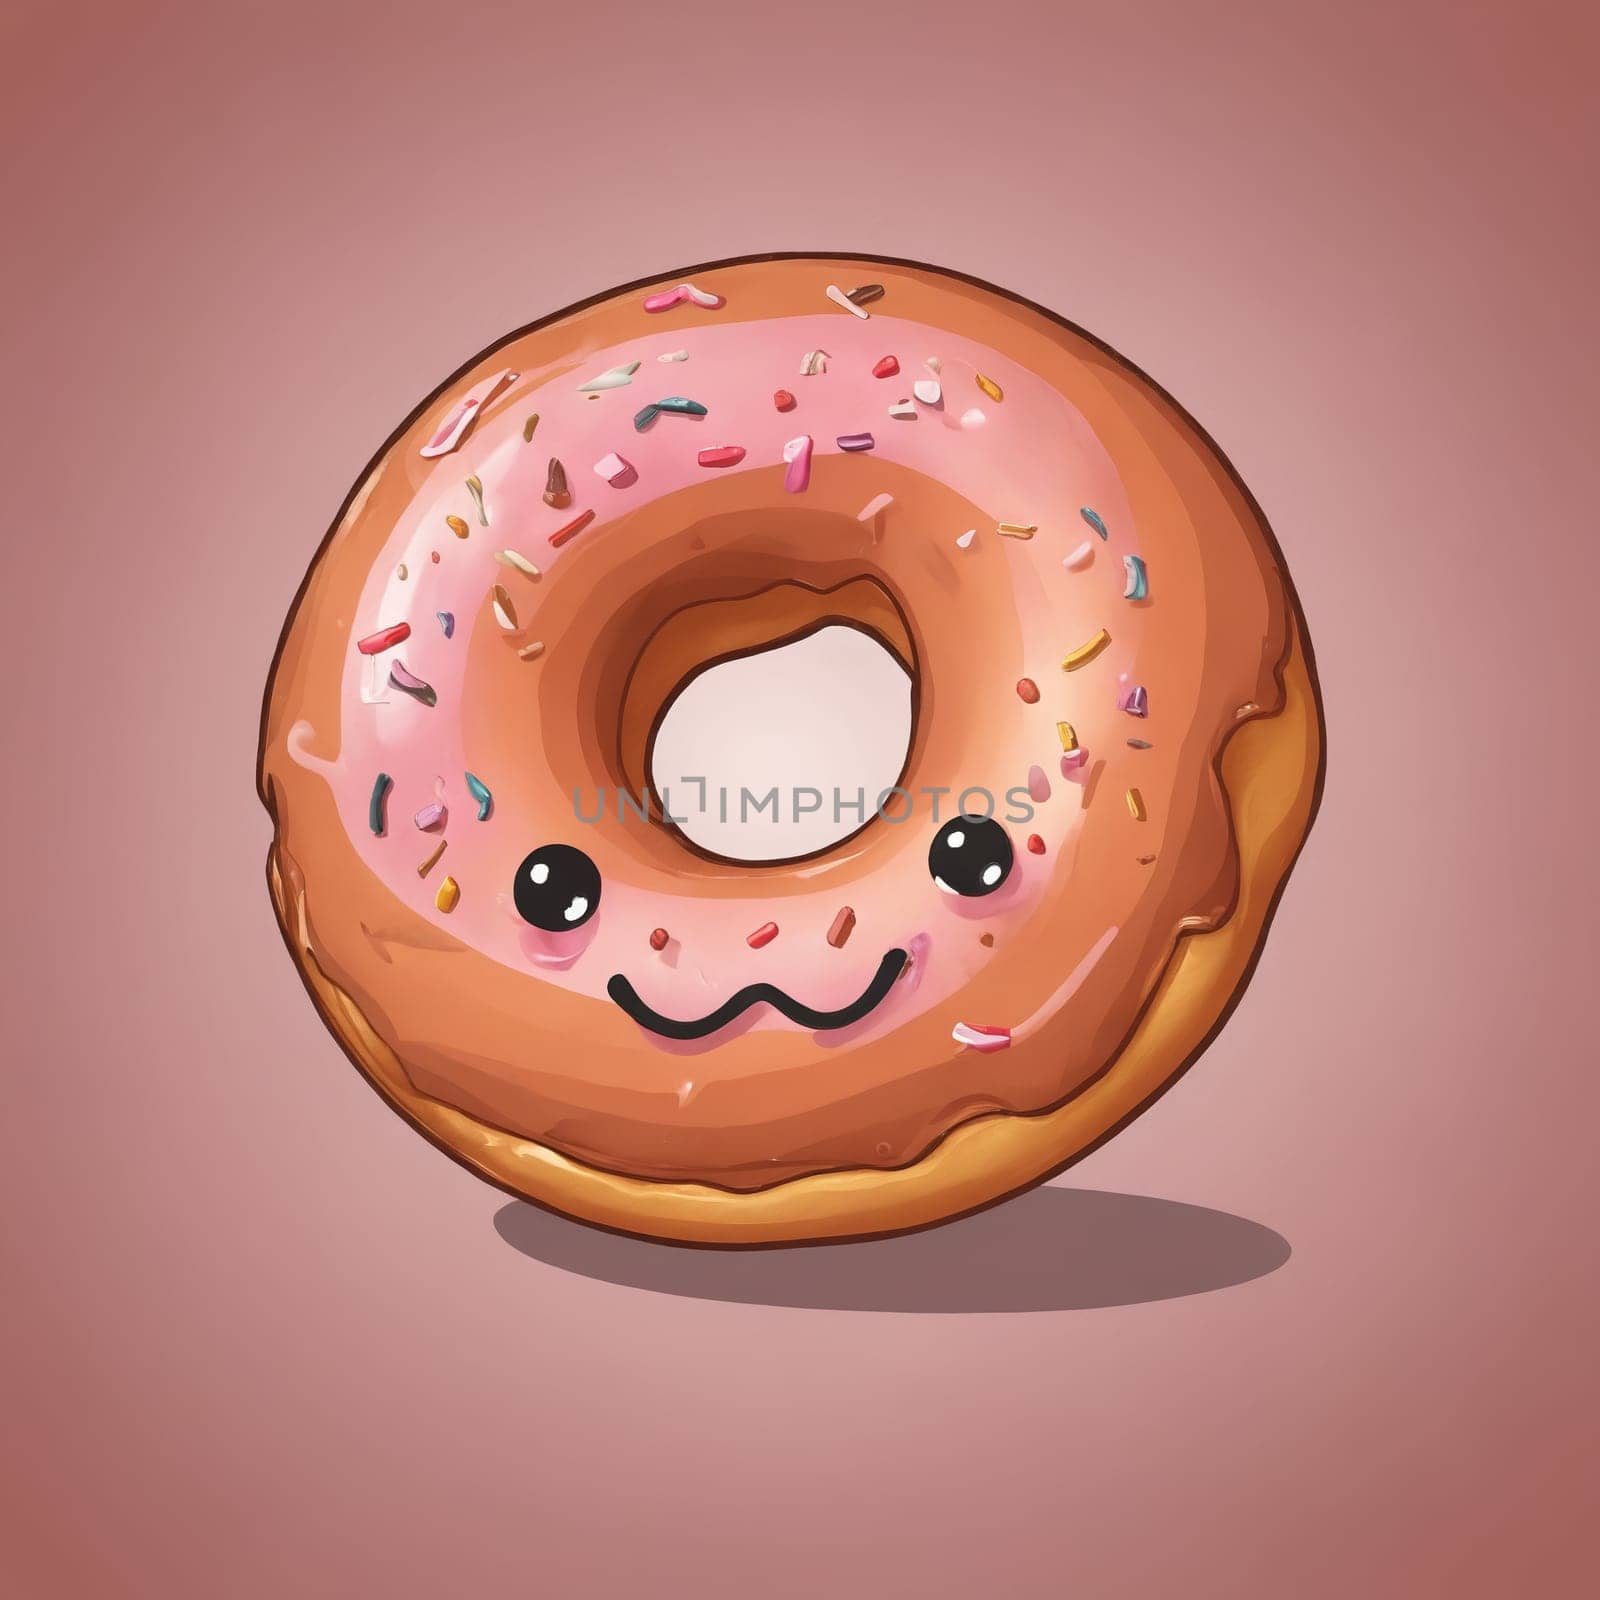 A digital novella of sweetness brought to life in the form of a vibrantly sprinkled donut with pink icing.